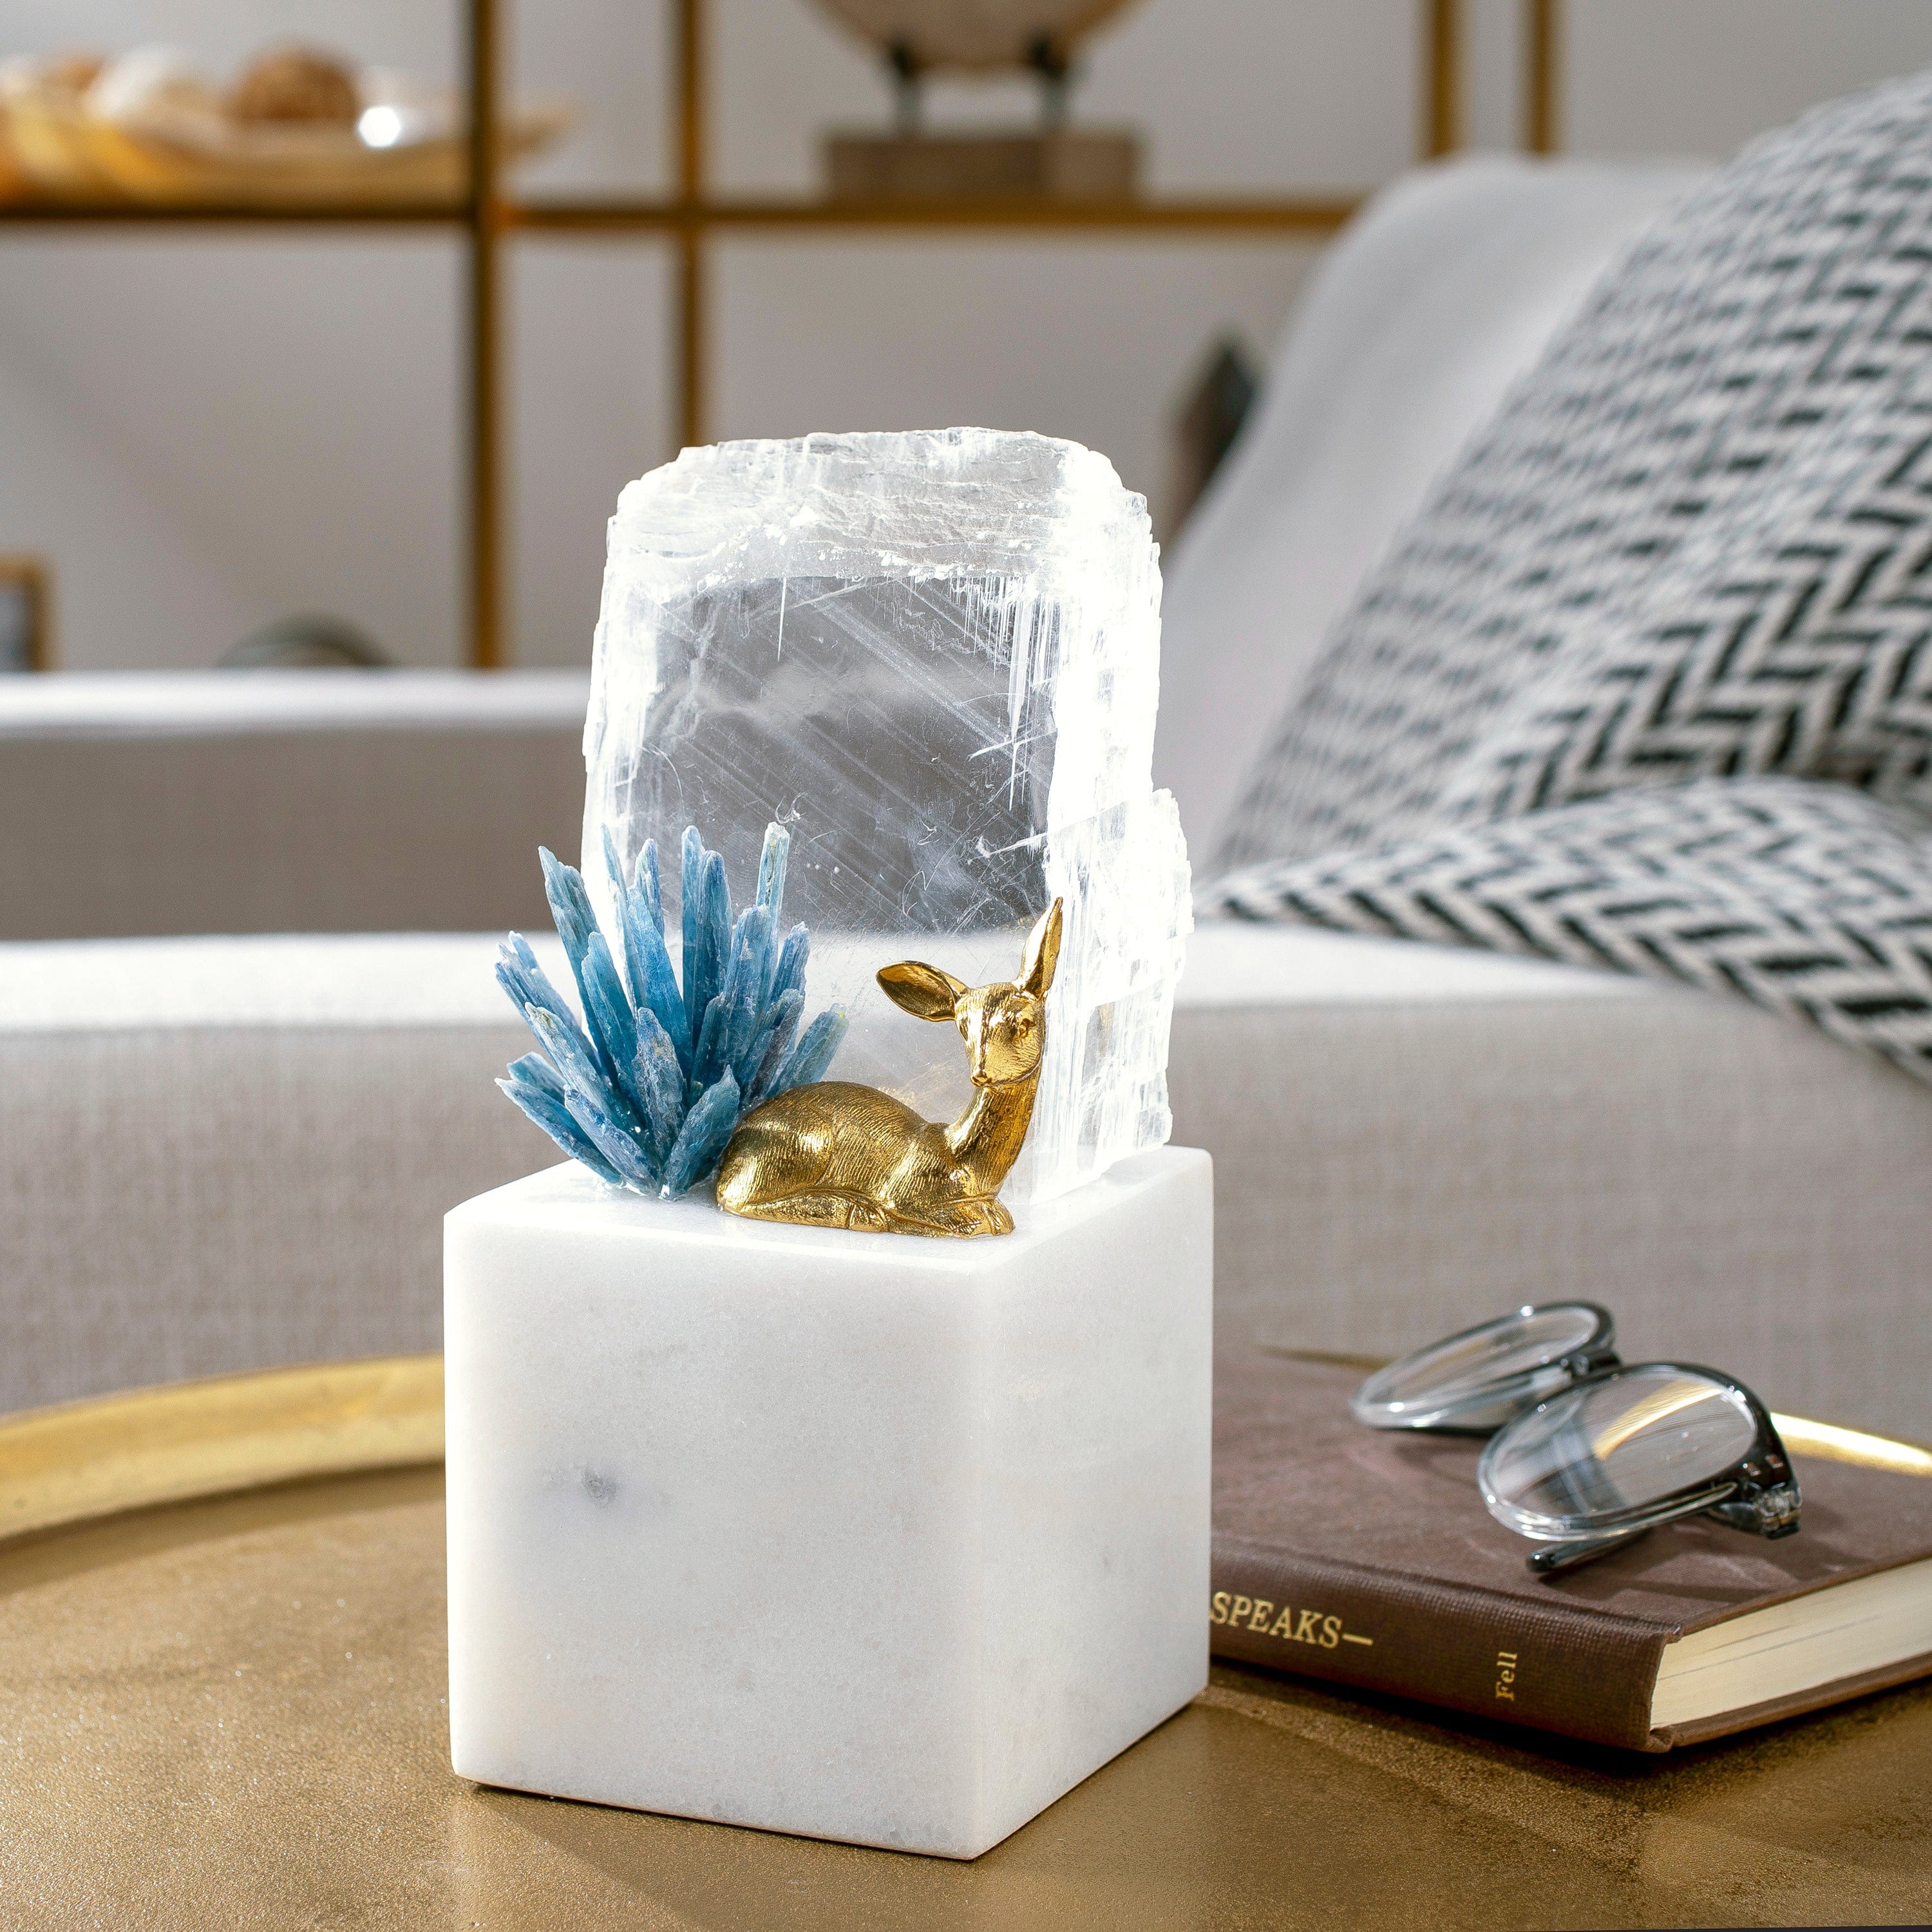 KALIFANO Crystal Home Decor Brass Deer on Marble Base with Calcite and Kyanite HG1493B-MT